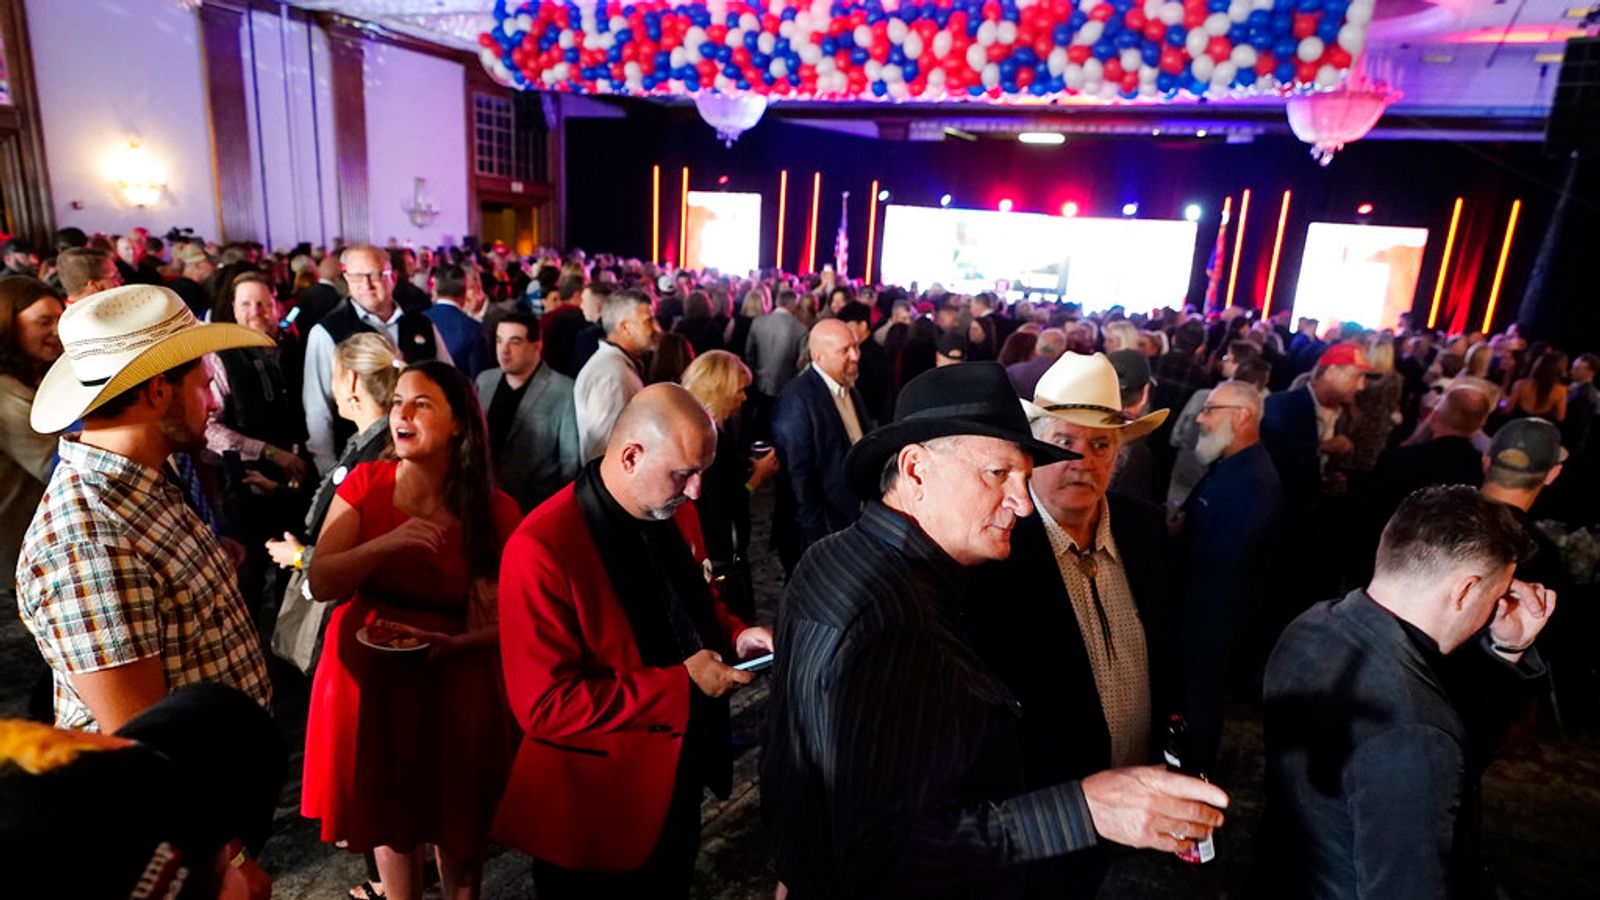 Inside a Republican election party as celebrations descend into disappointment and fraud claims